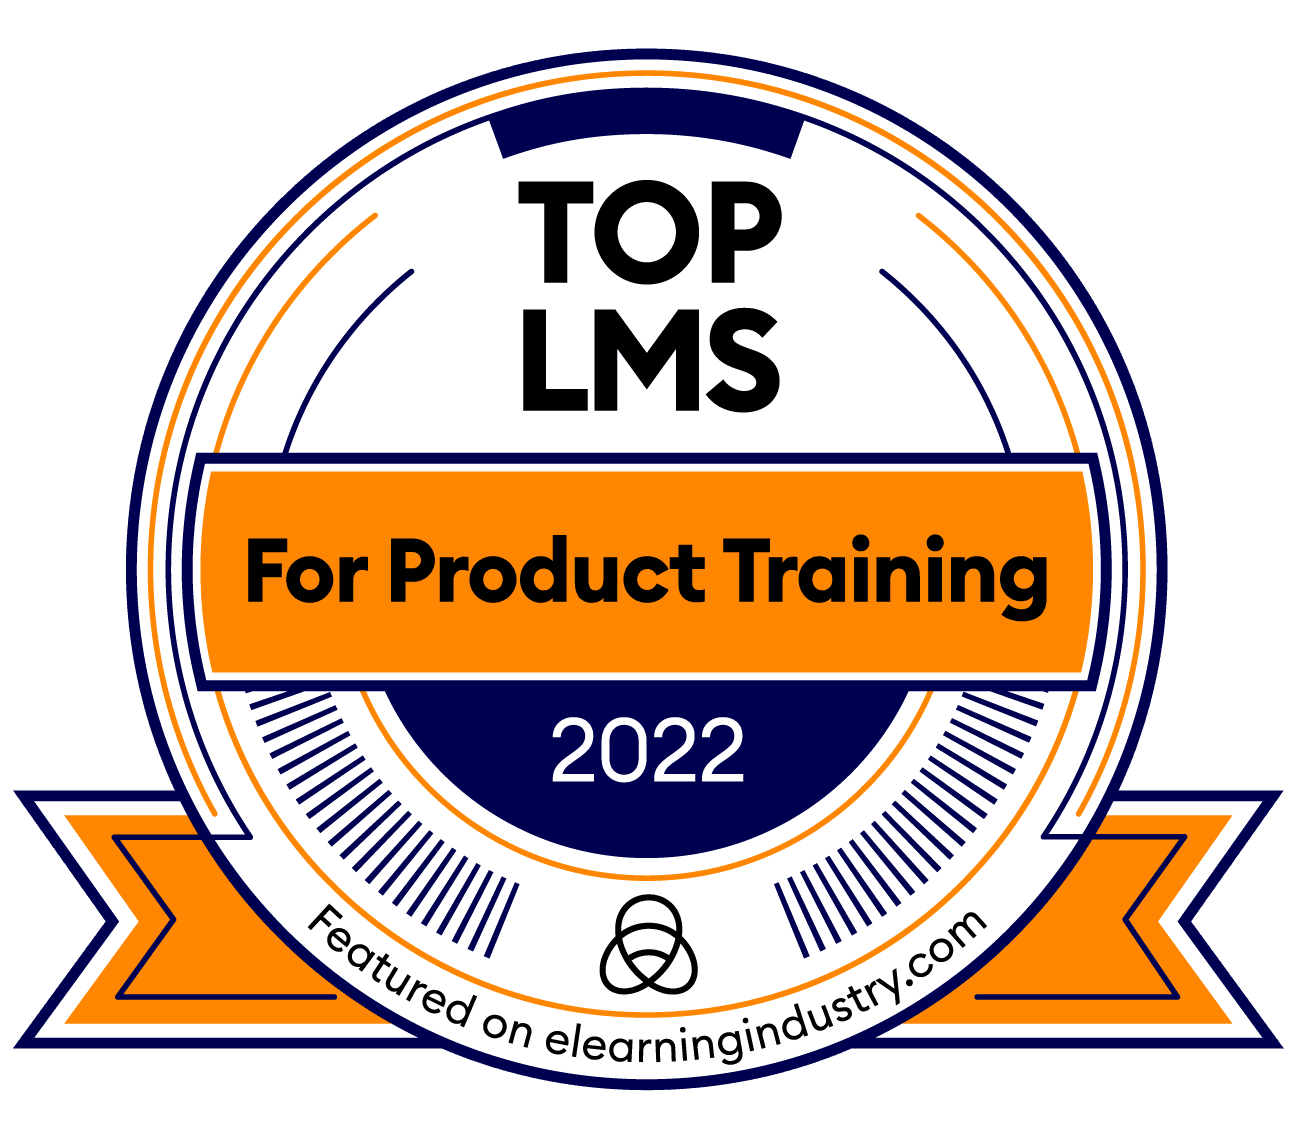 KREDO recognized as Top LMS for Product Training 2022 by eLearning Industry